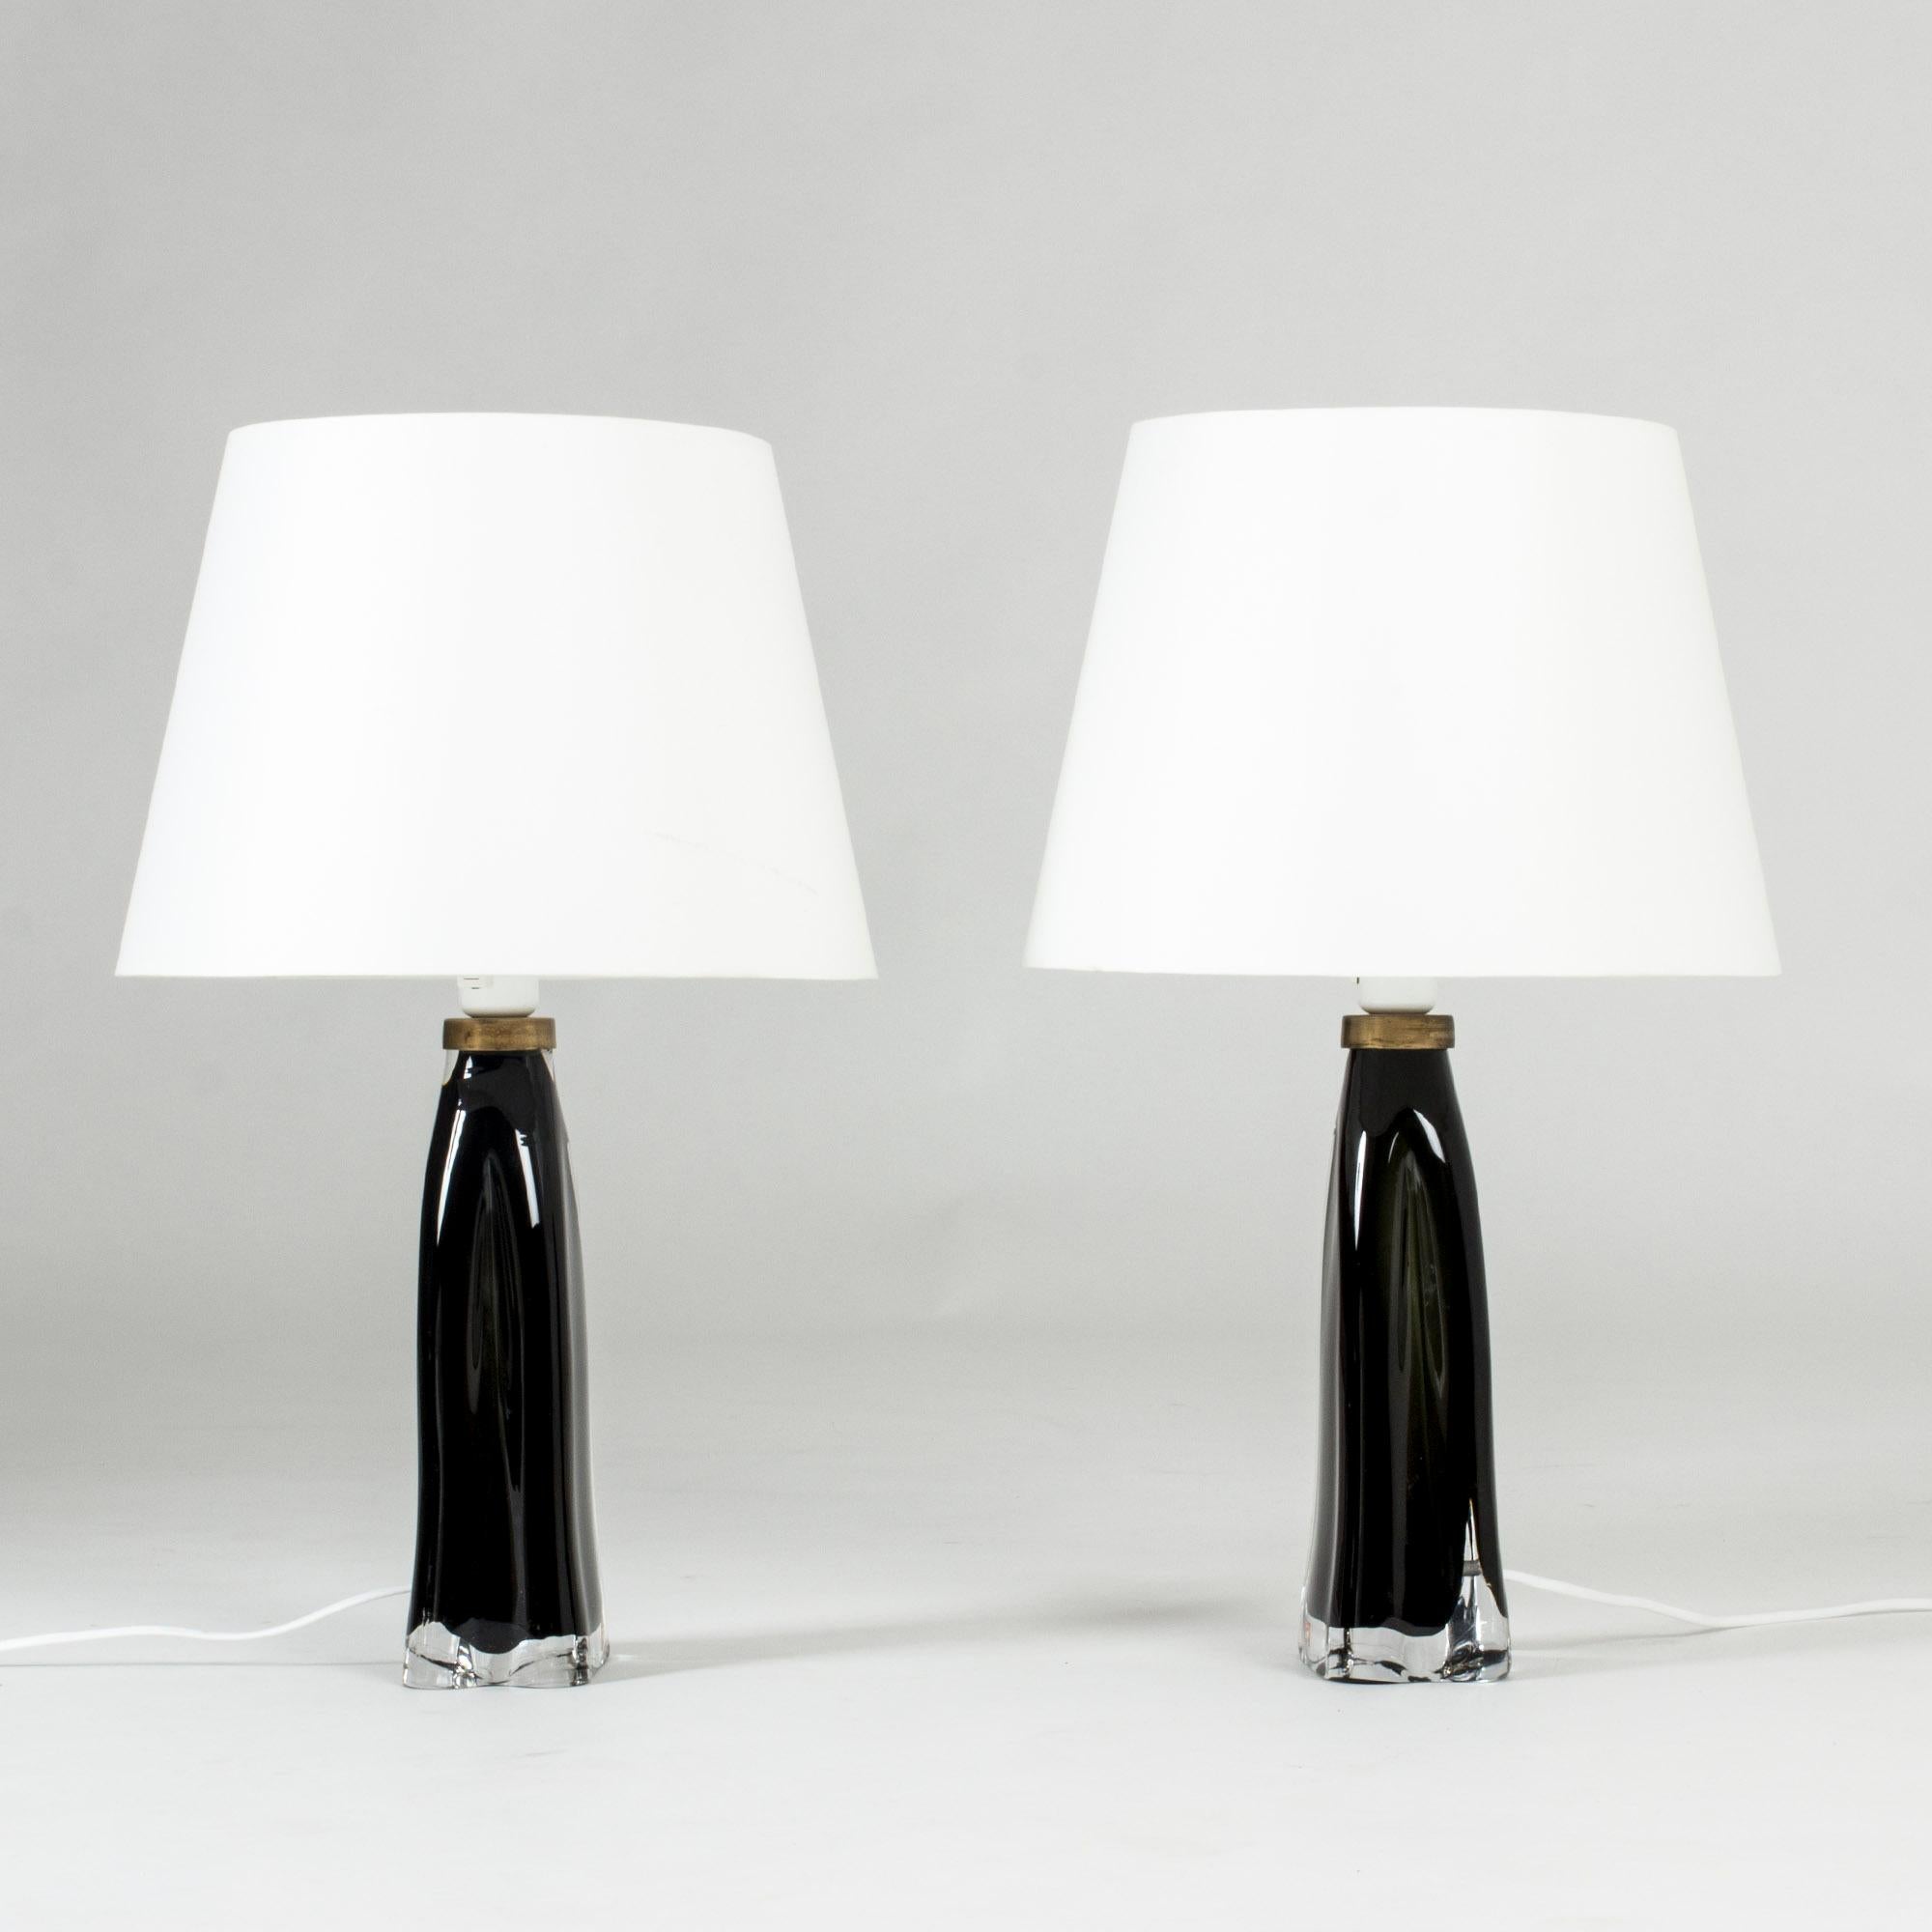 Scandinavian Modern Pair of Midcentury Glass Table Lamps by Carl Fagerlund